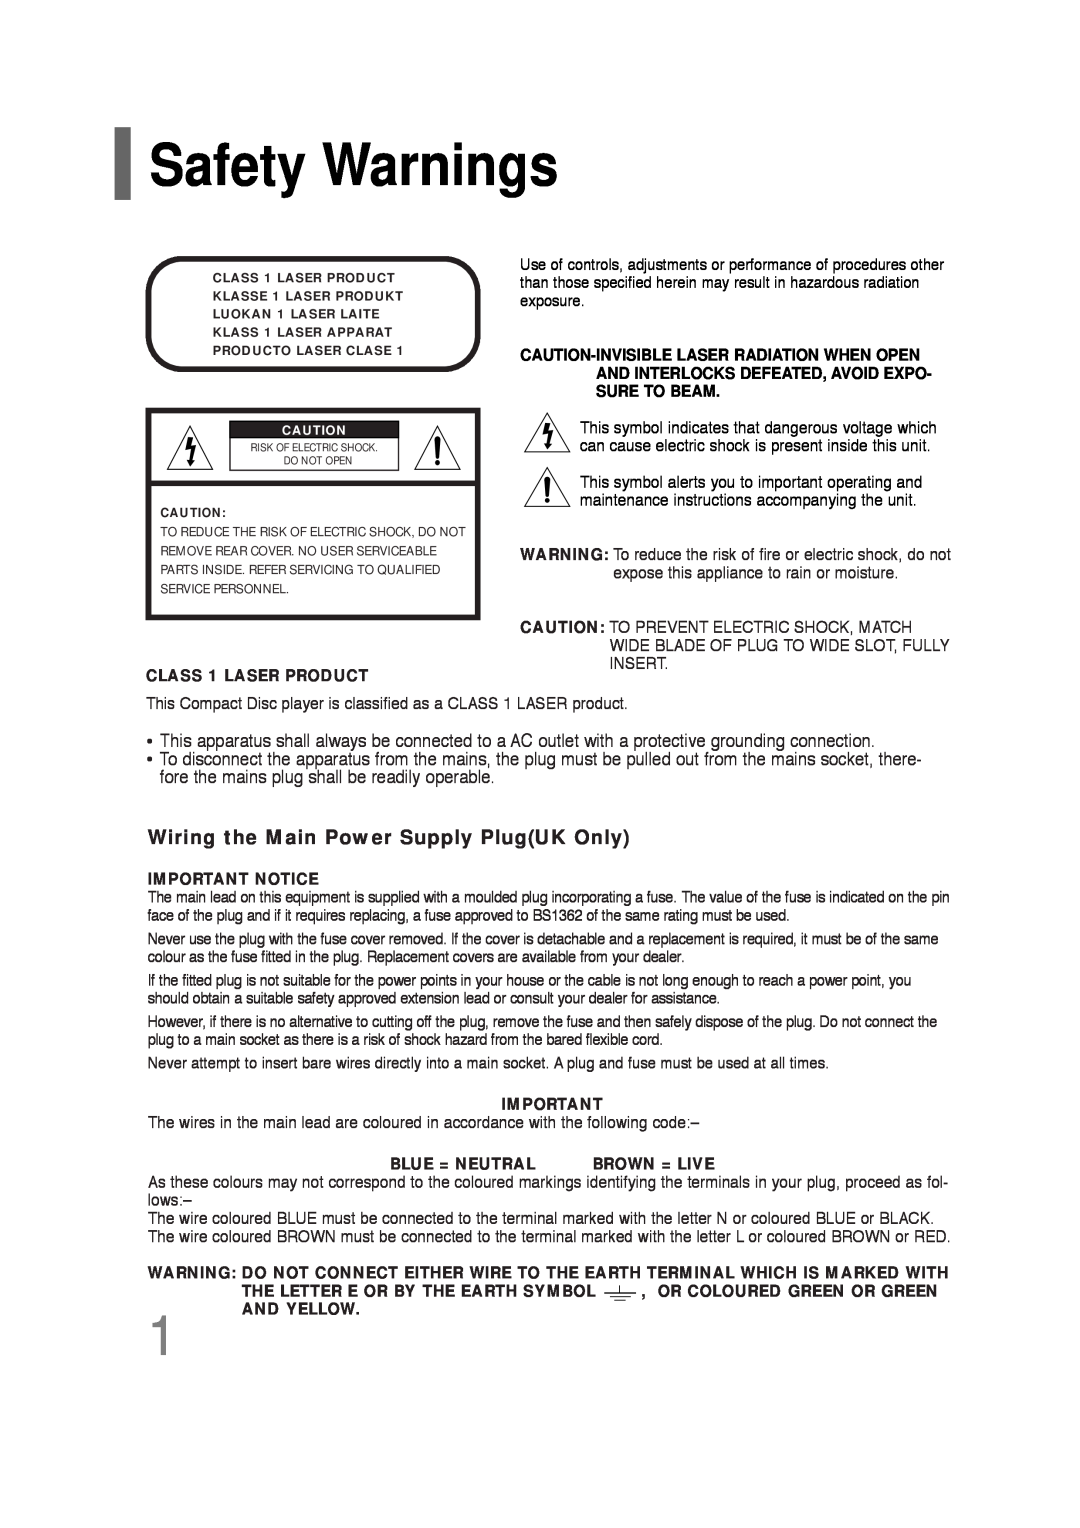 Samsung HT-Q20, HT-TQ22 instruction manual Safety Warnings, Wiring the Main Power Supply PlugUK Only 